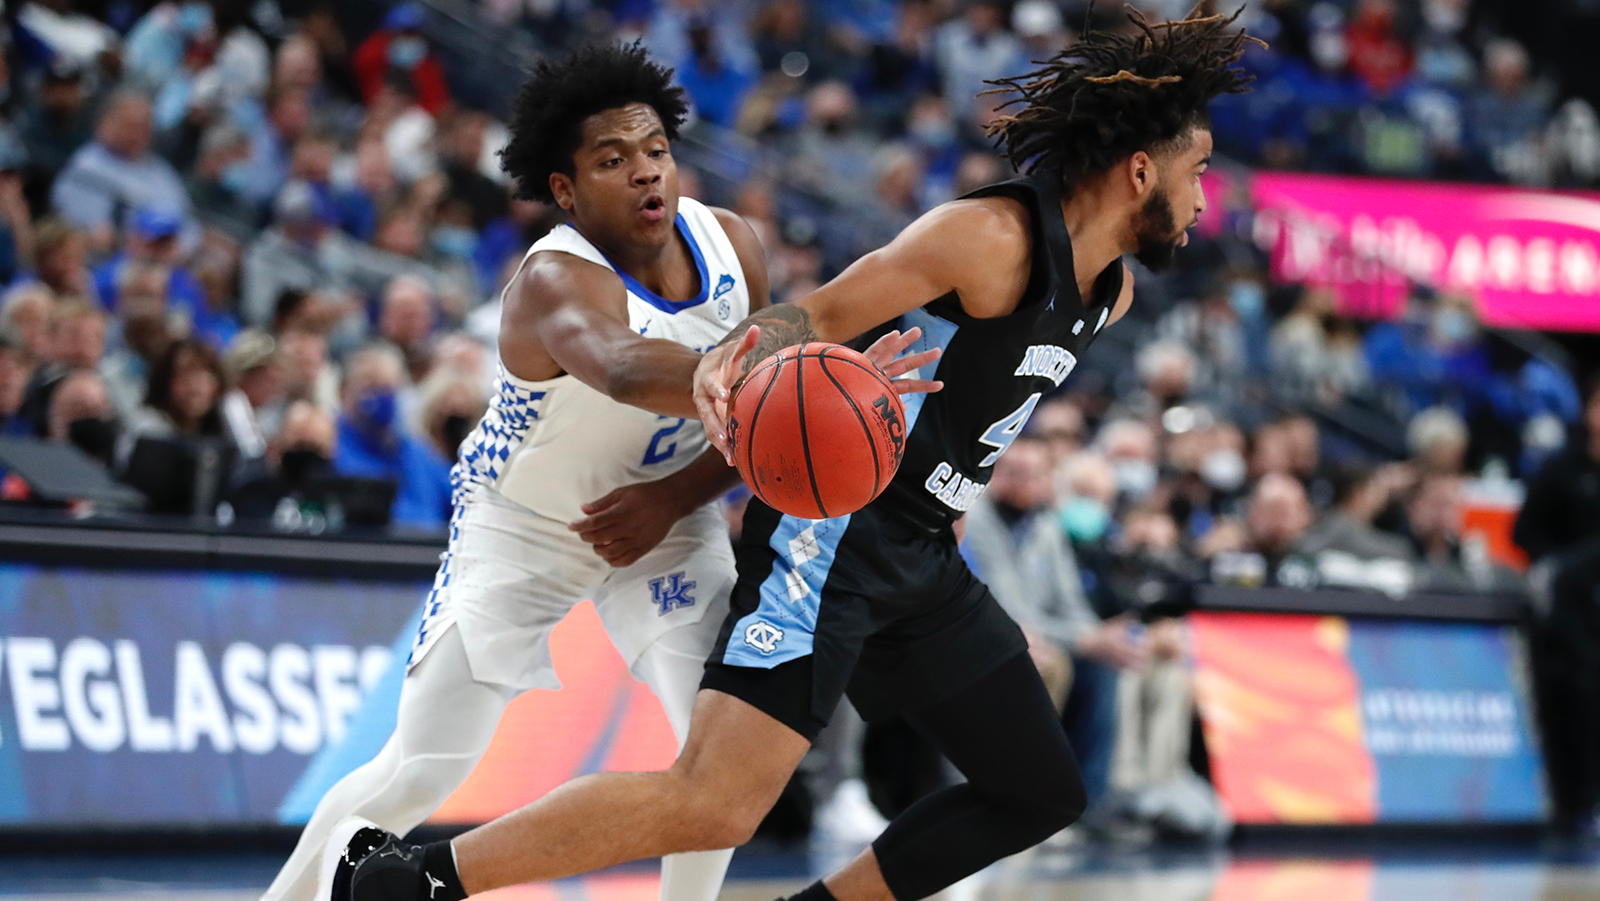 Cats Bounce Back in Big Way Against Tar Heels